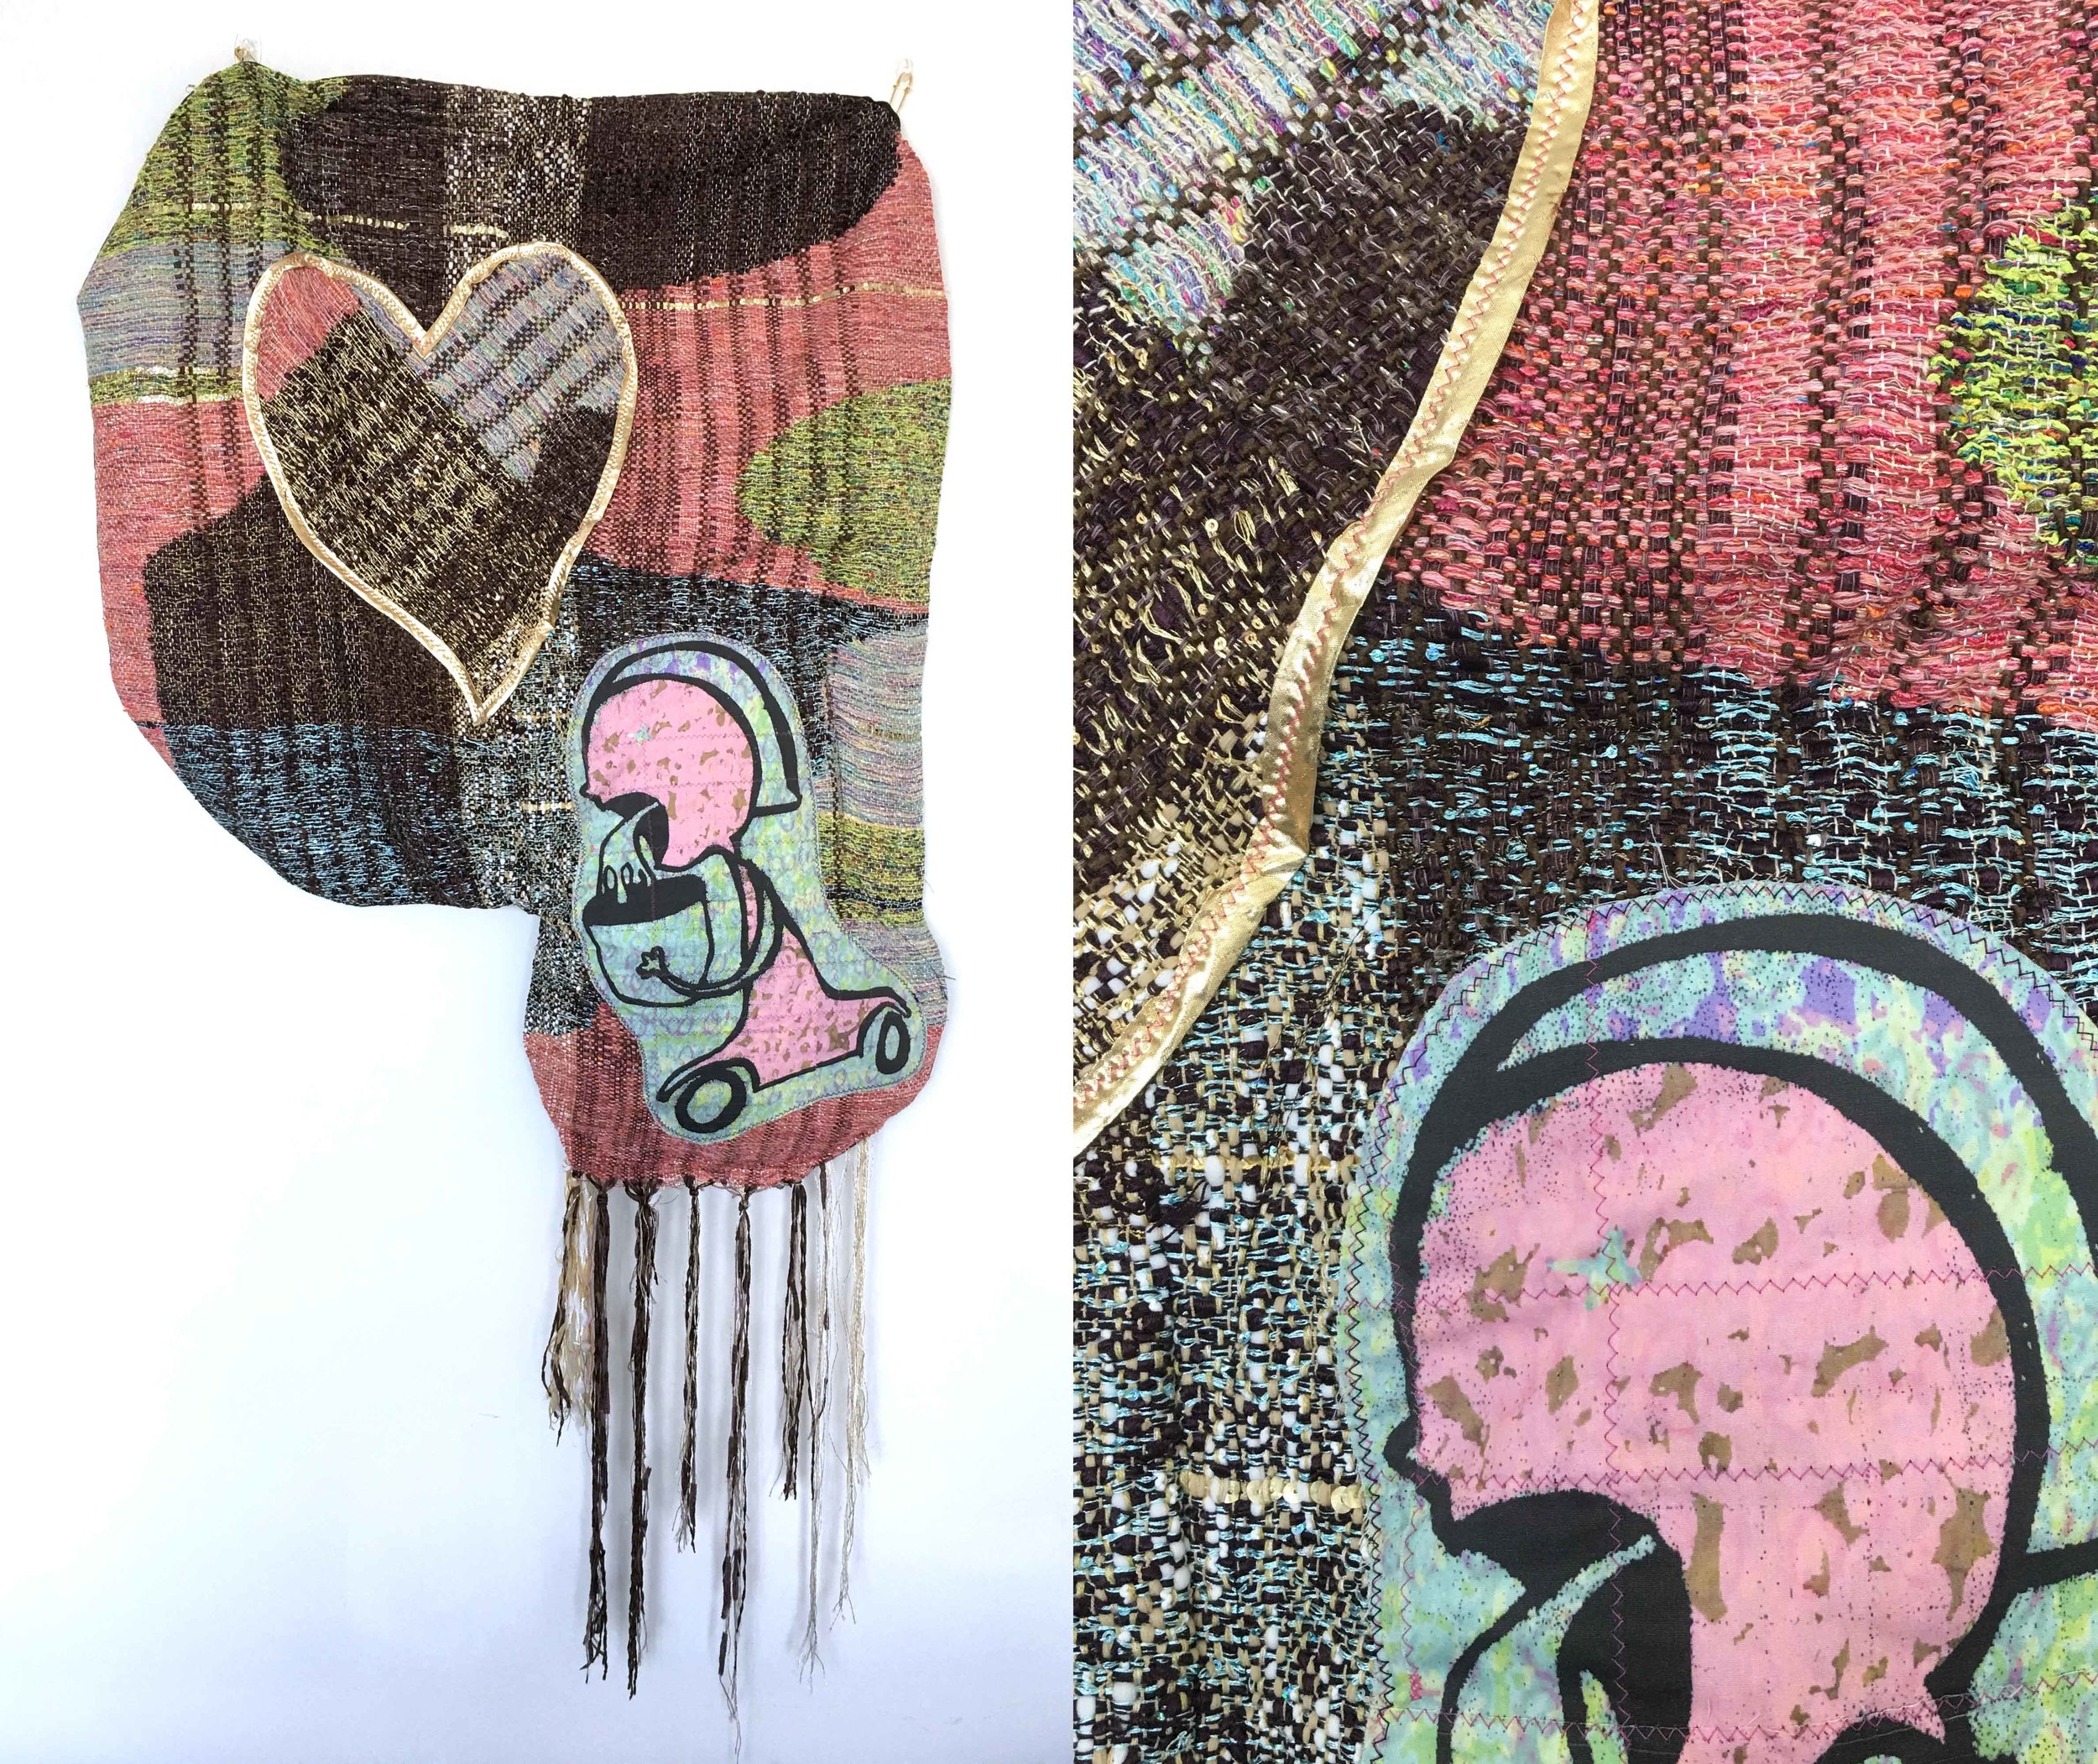   Really Love Sick  h: 36" x w: 28" hand-woven and machine-made fabric, embroidery, inkjet prints, fleece 2017 